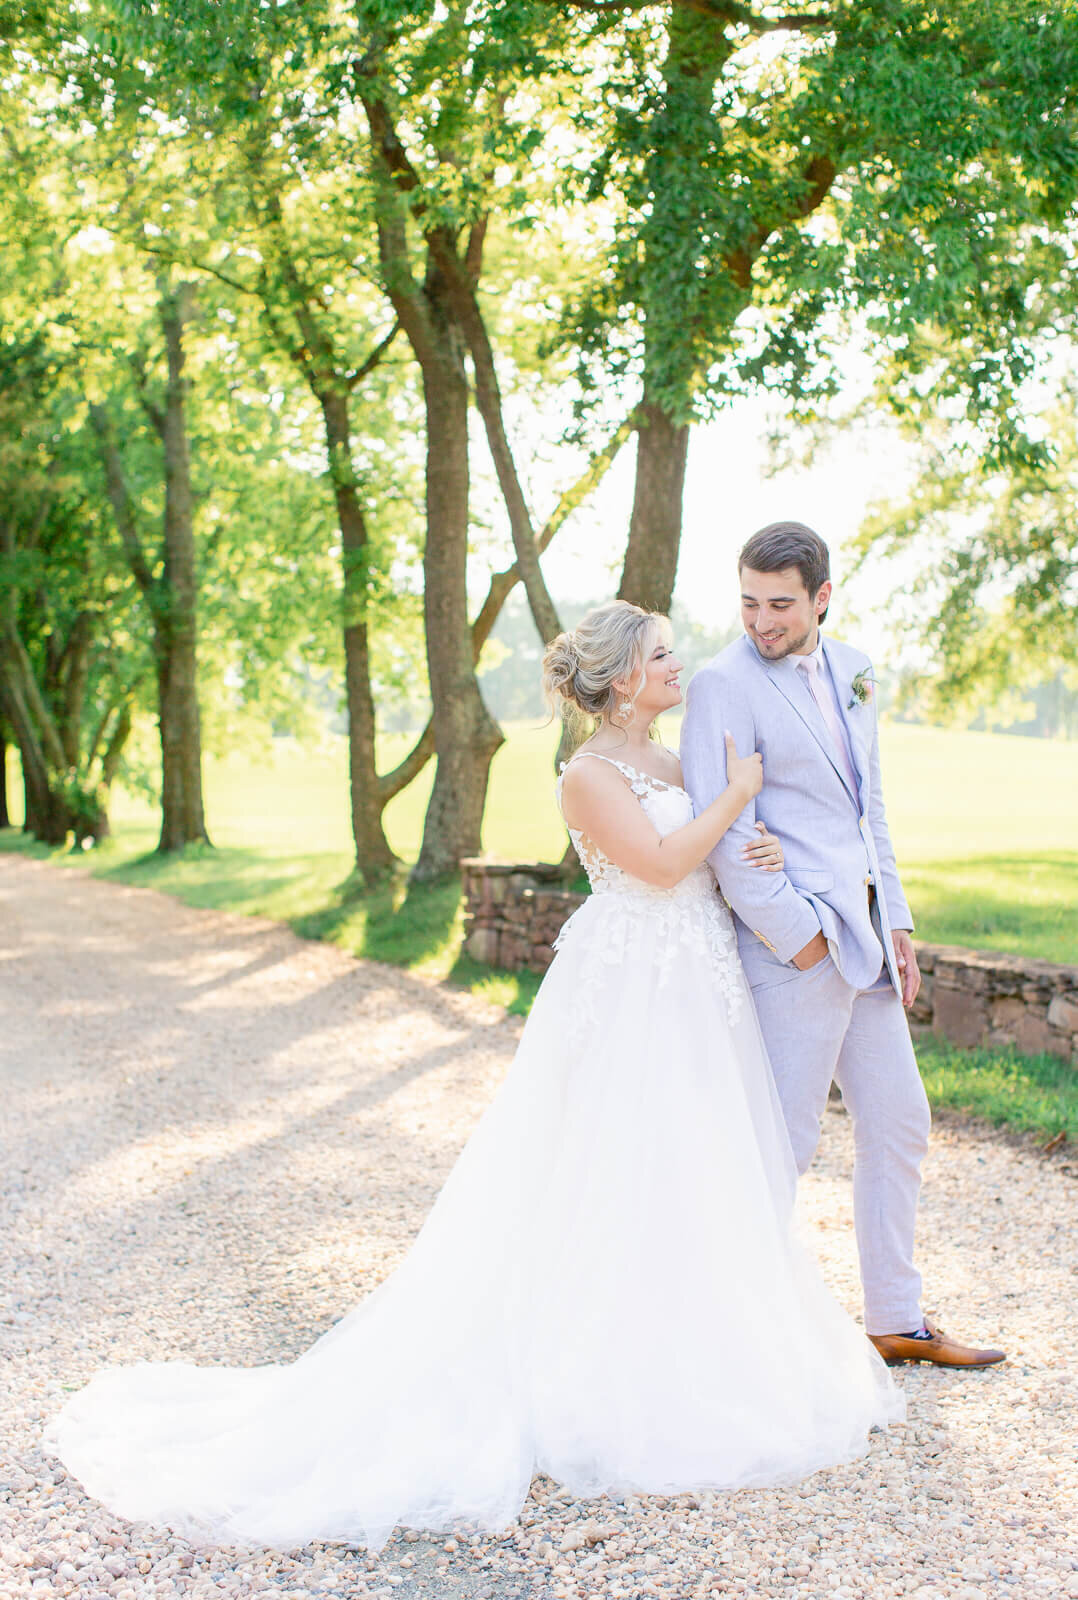 Golden hour photos at Great Marsh Estate. Captured by Bethany Aubre Photography.